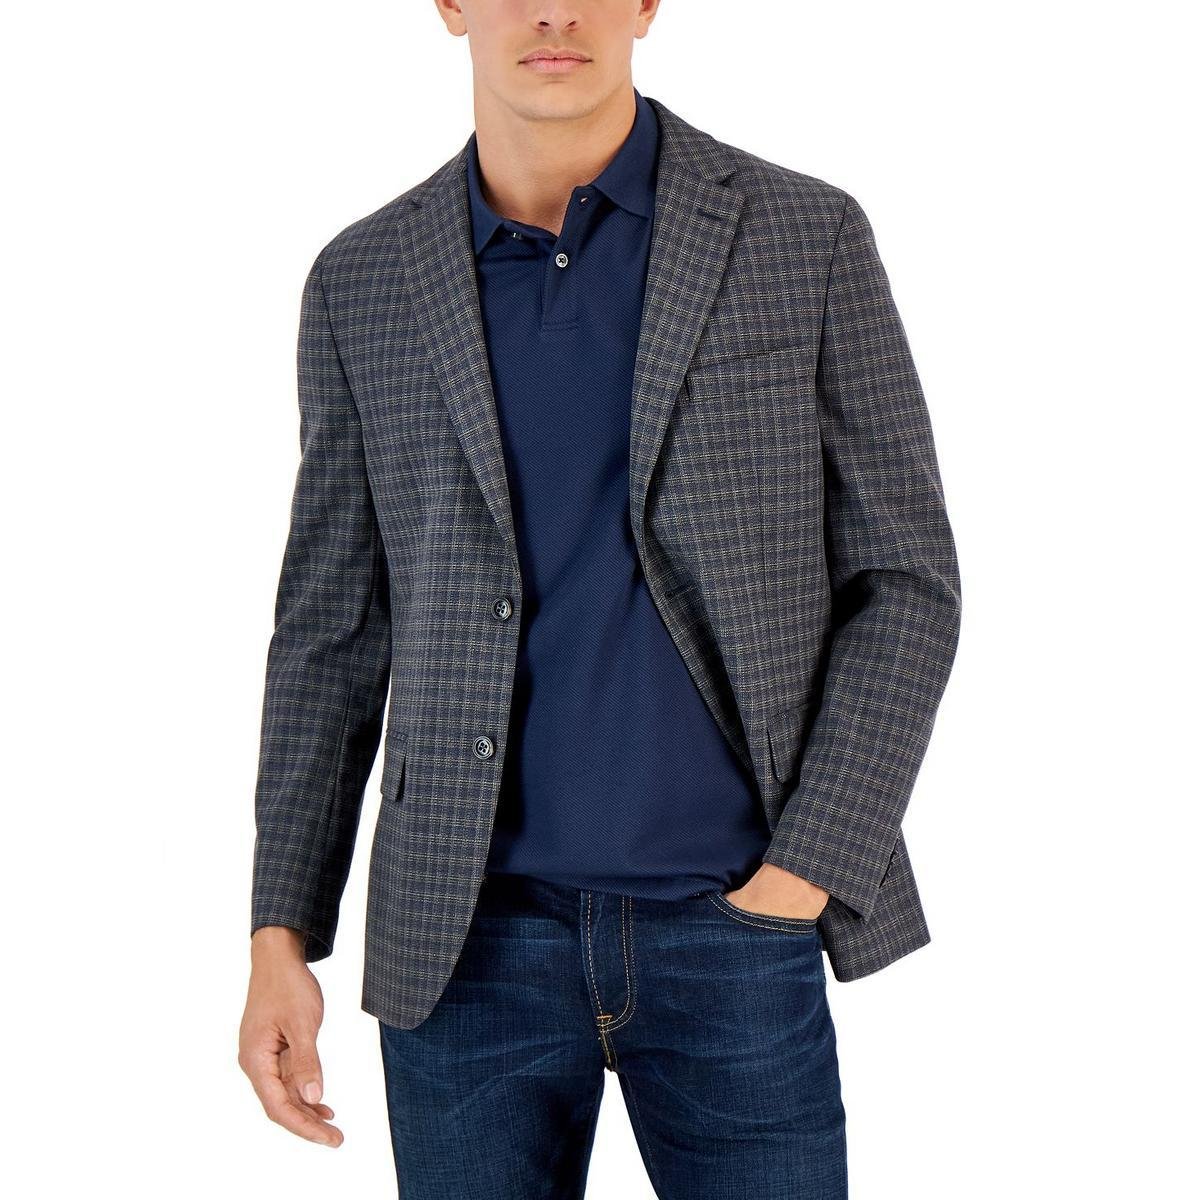 Tommy Hilfiger Mens Conrad Check Print Modern Fit Sportcoat by TOMMY HILFIGER